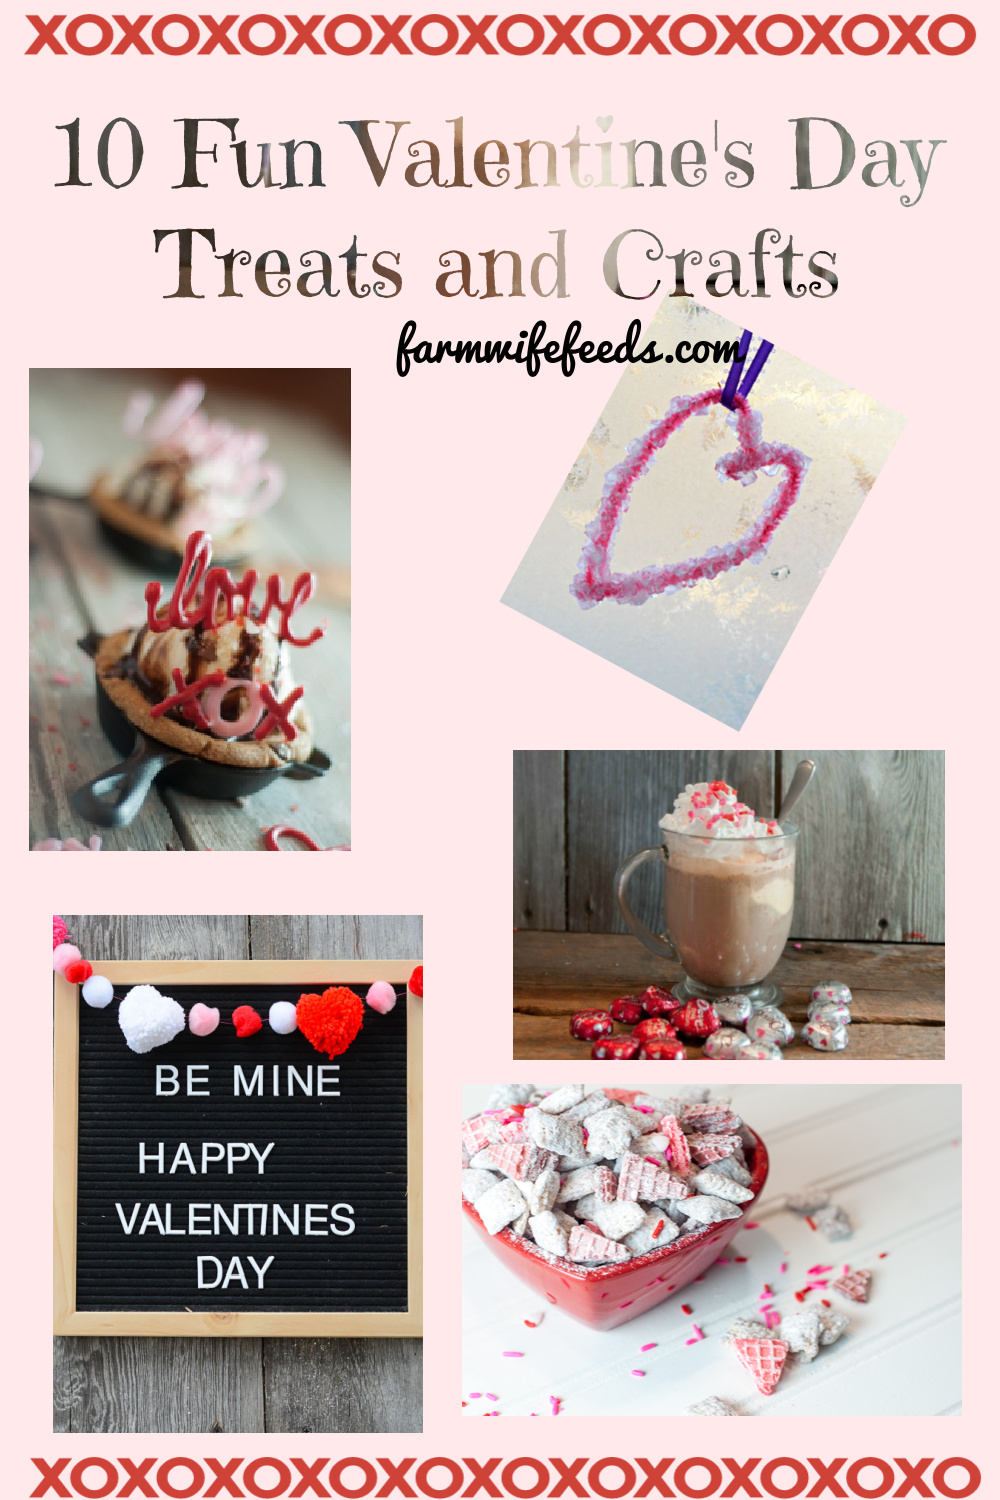 10 Fun Valentine's Day Treats and Crafts from Farmwife Feeds. Make a simple holiday fun with snacks and projects kids and adults will love to do together. #valentine #heart #snack #love